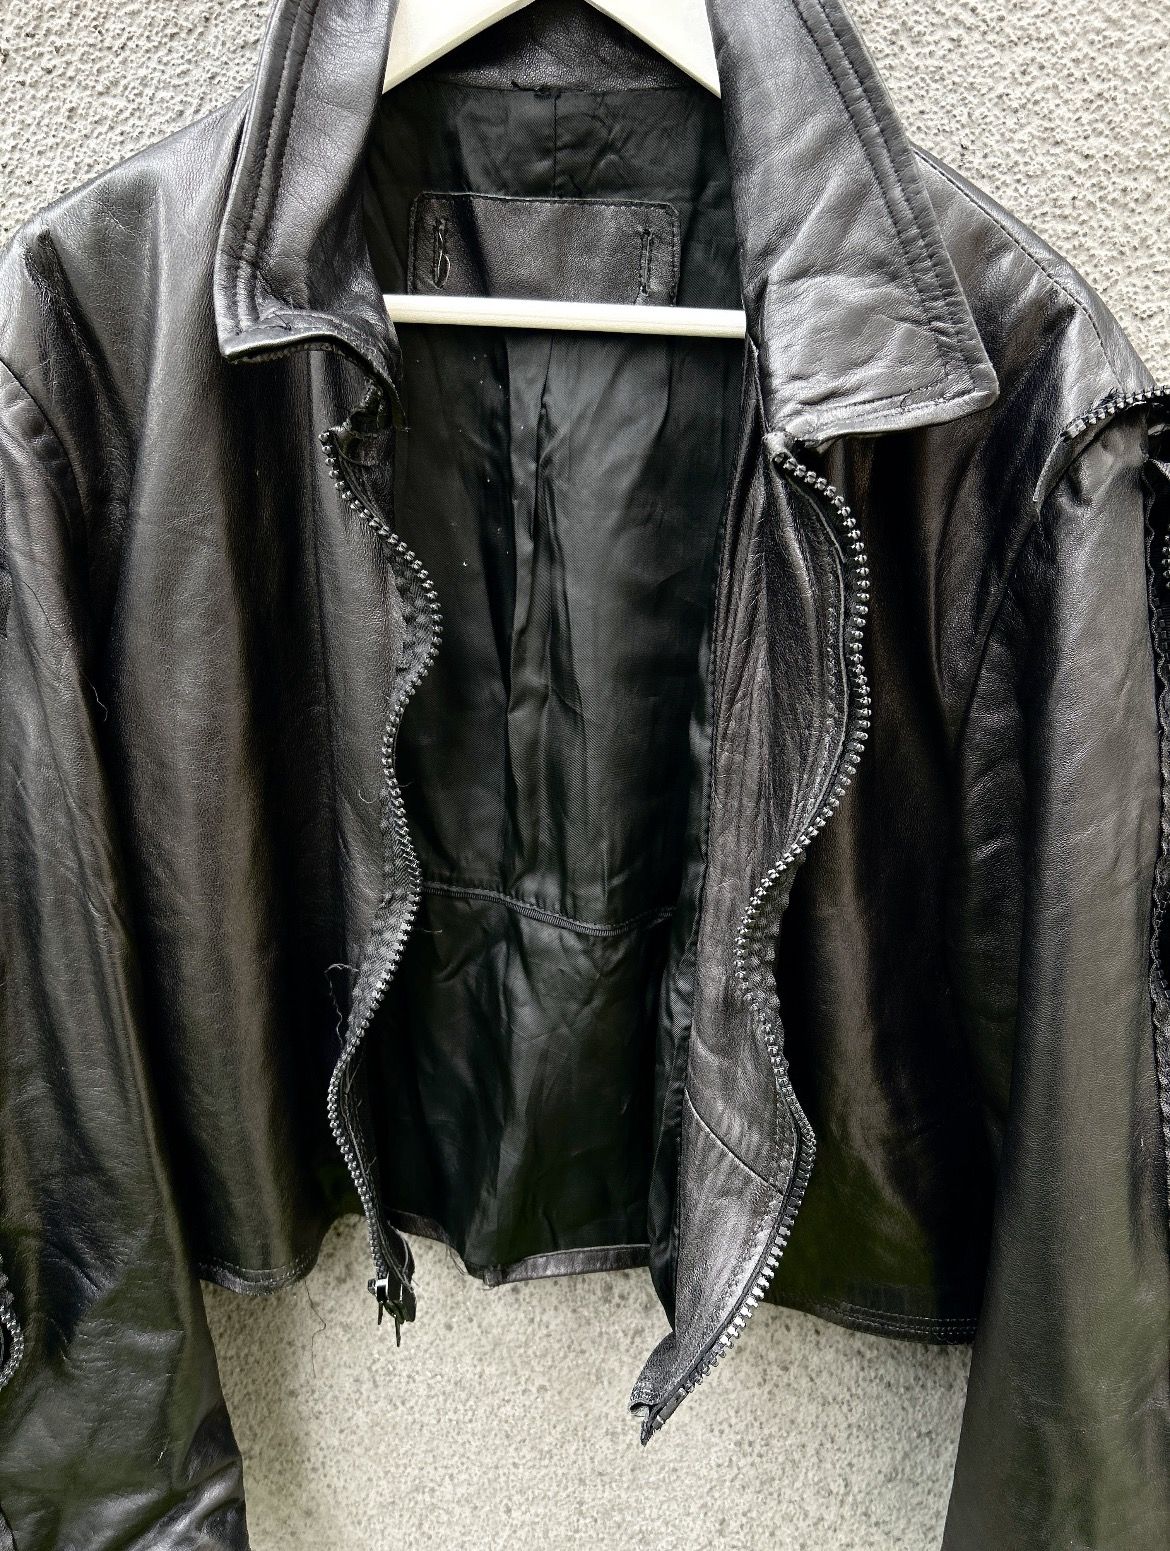 Vintage Avant Garde Archival Clothing Cropped Zip Up Leather Jacket Size US L / EU 52-54 / 3 - 8 Preview